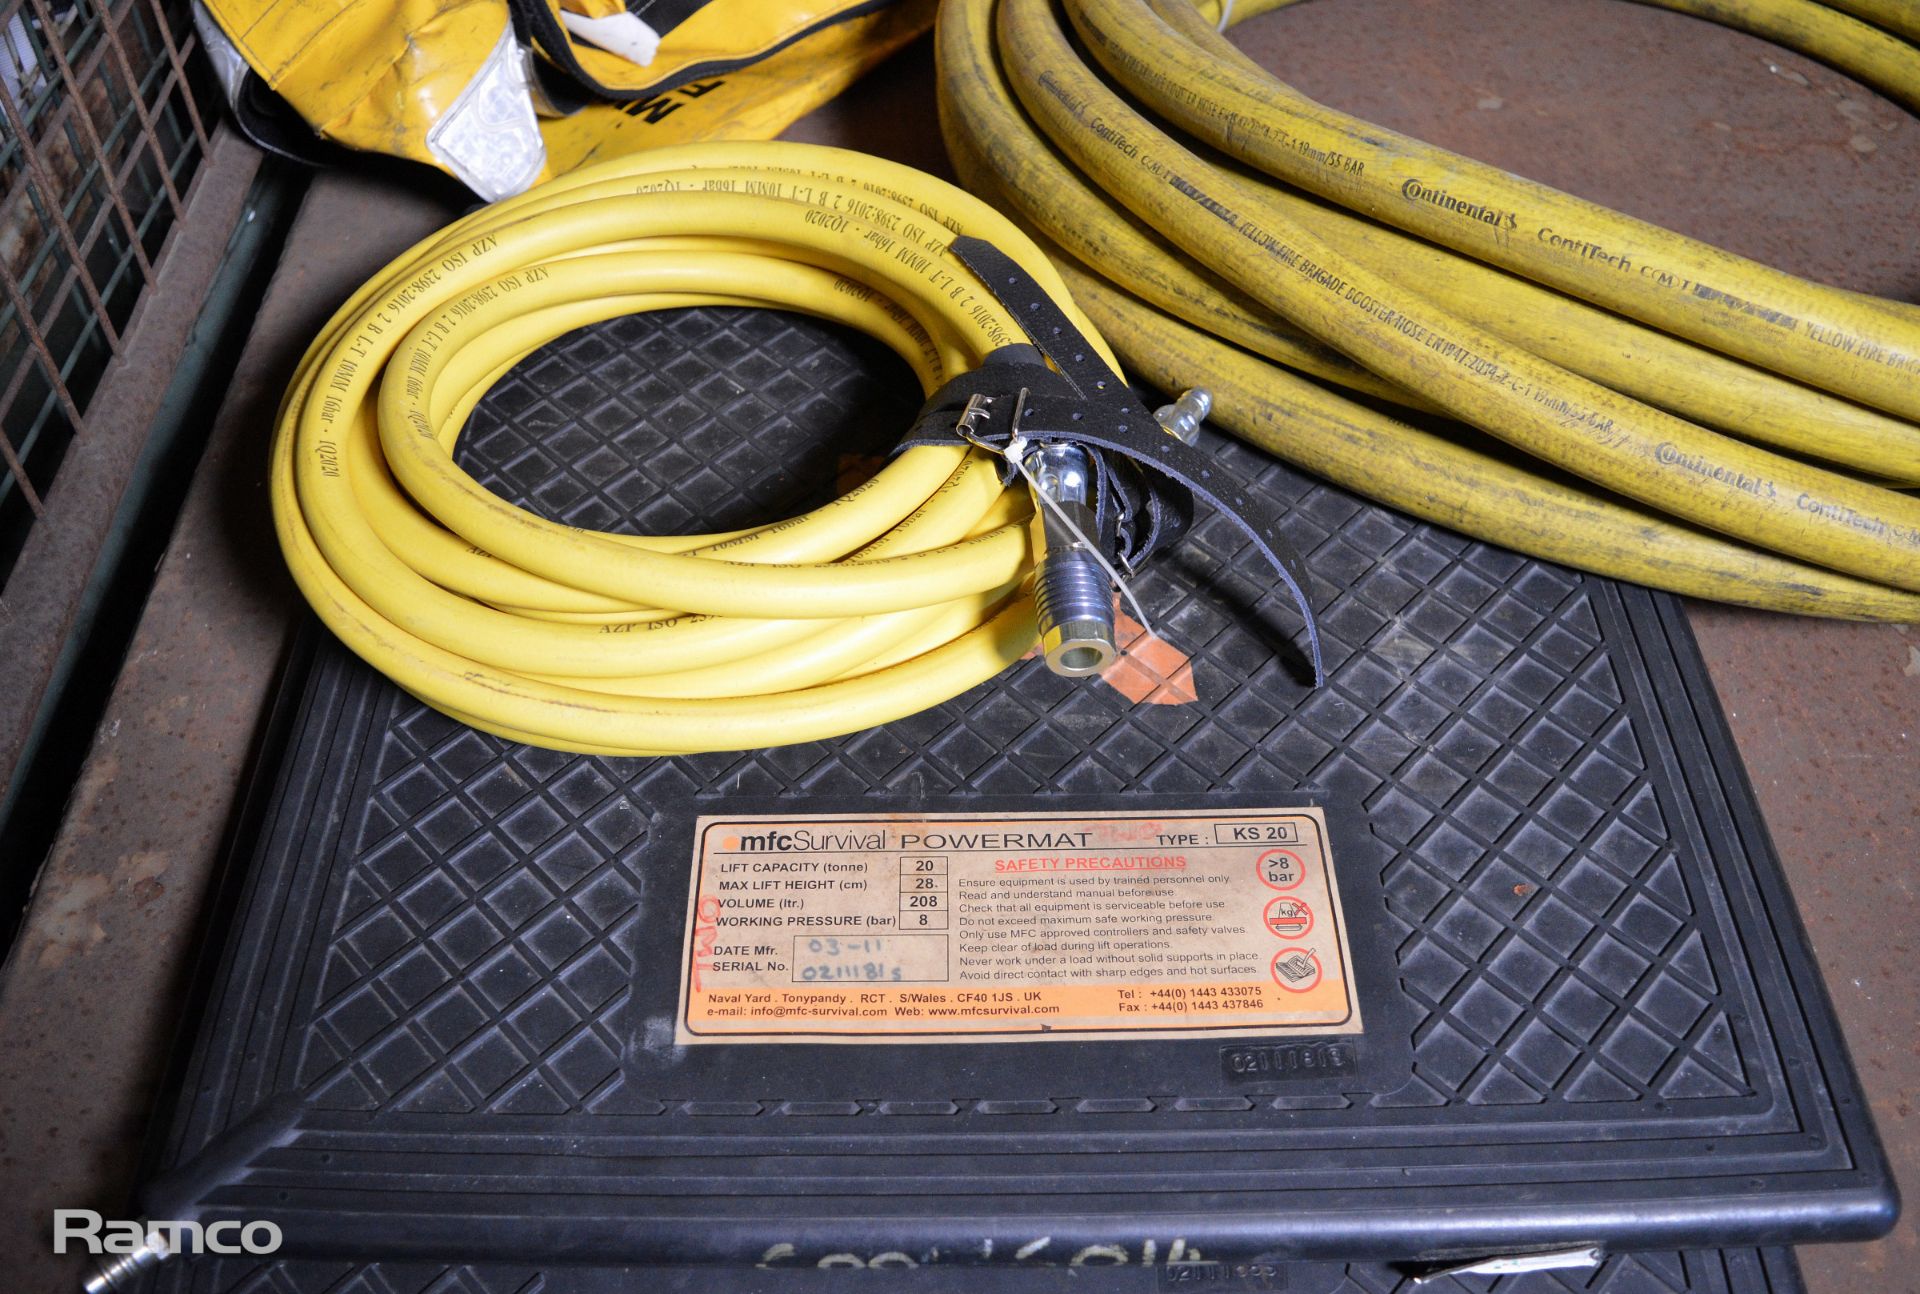 2x MFC Powermat KS20 high pressure lifting pads / bags, Hoses for inflation apparatus - Image 2 of 3